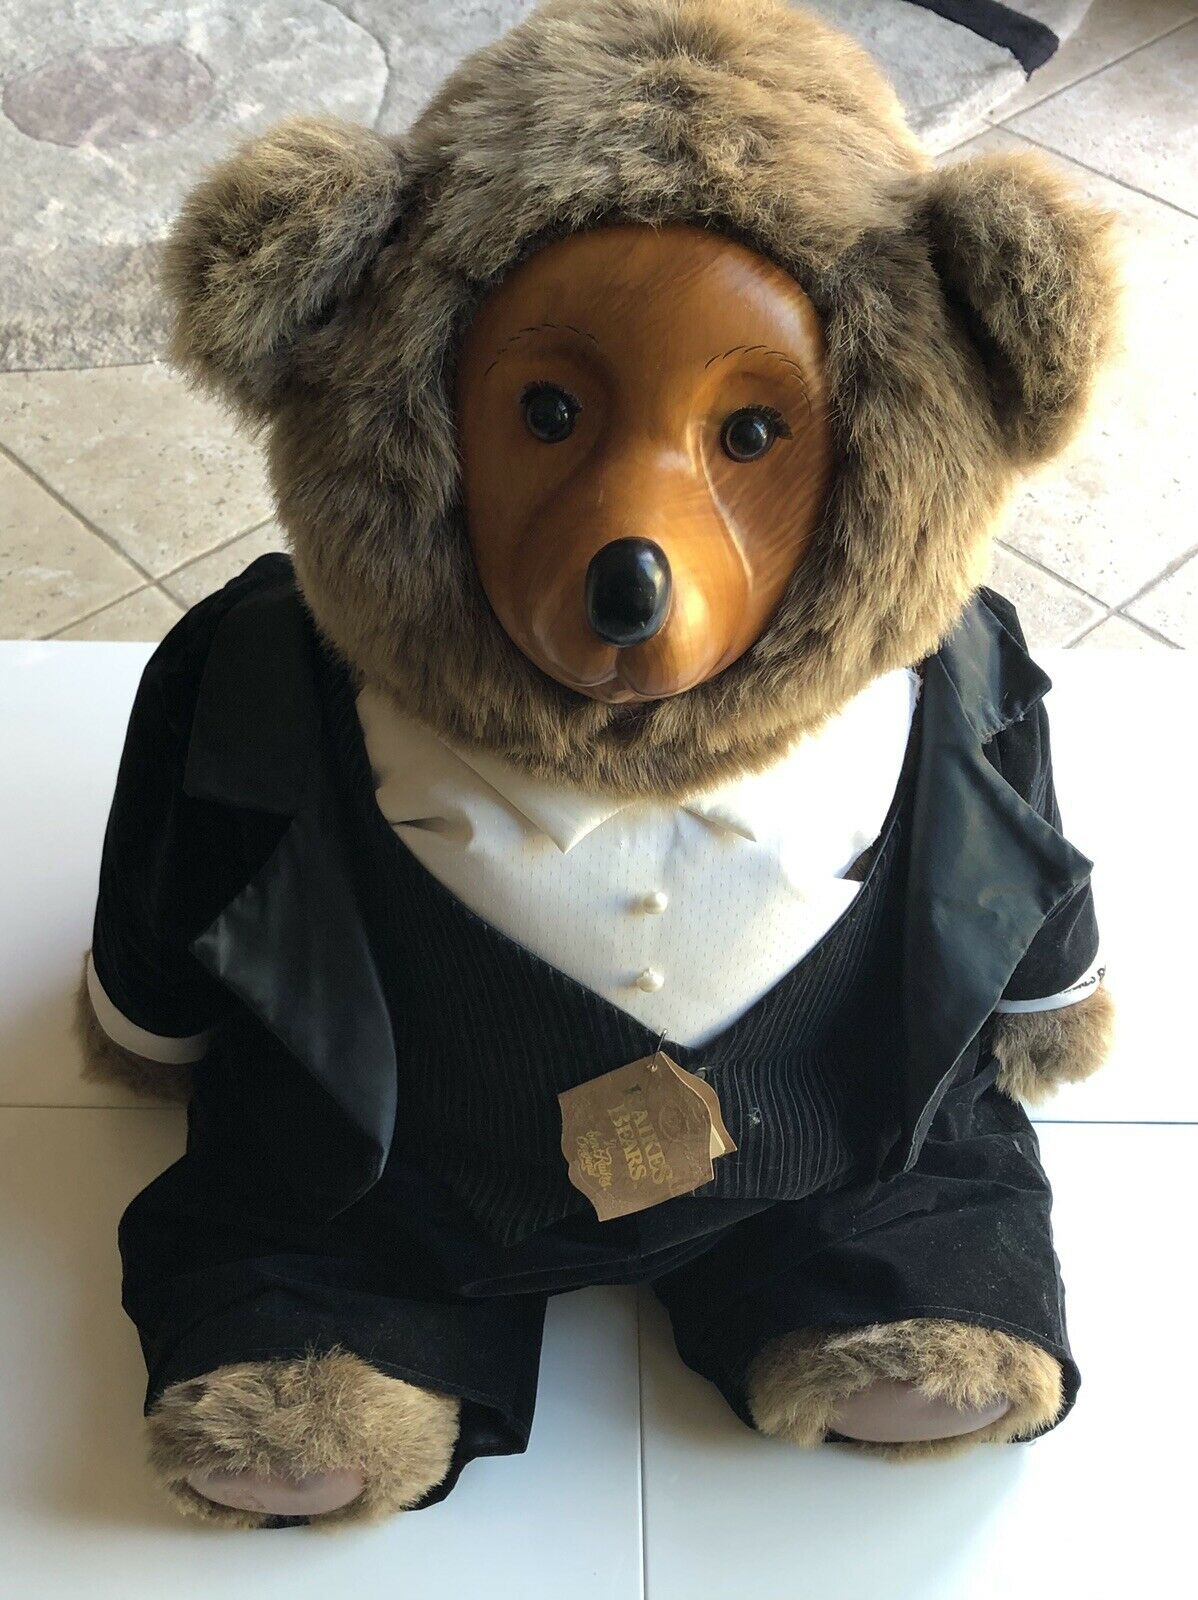 Vintage Authentic 1986 Robert Raikes Bears 5461 "tyrone" L.e. Approx. 3 Ft. Tall